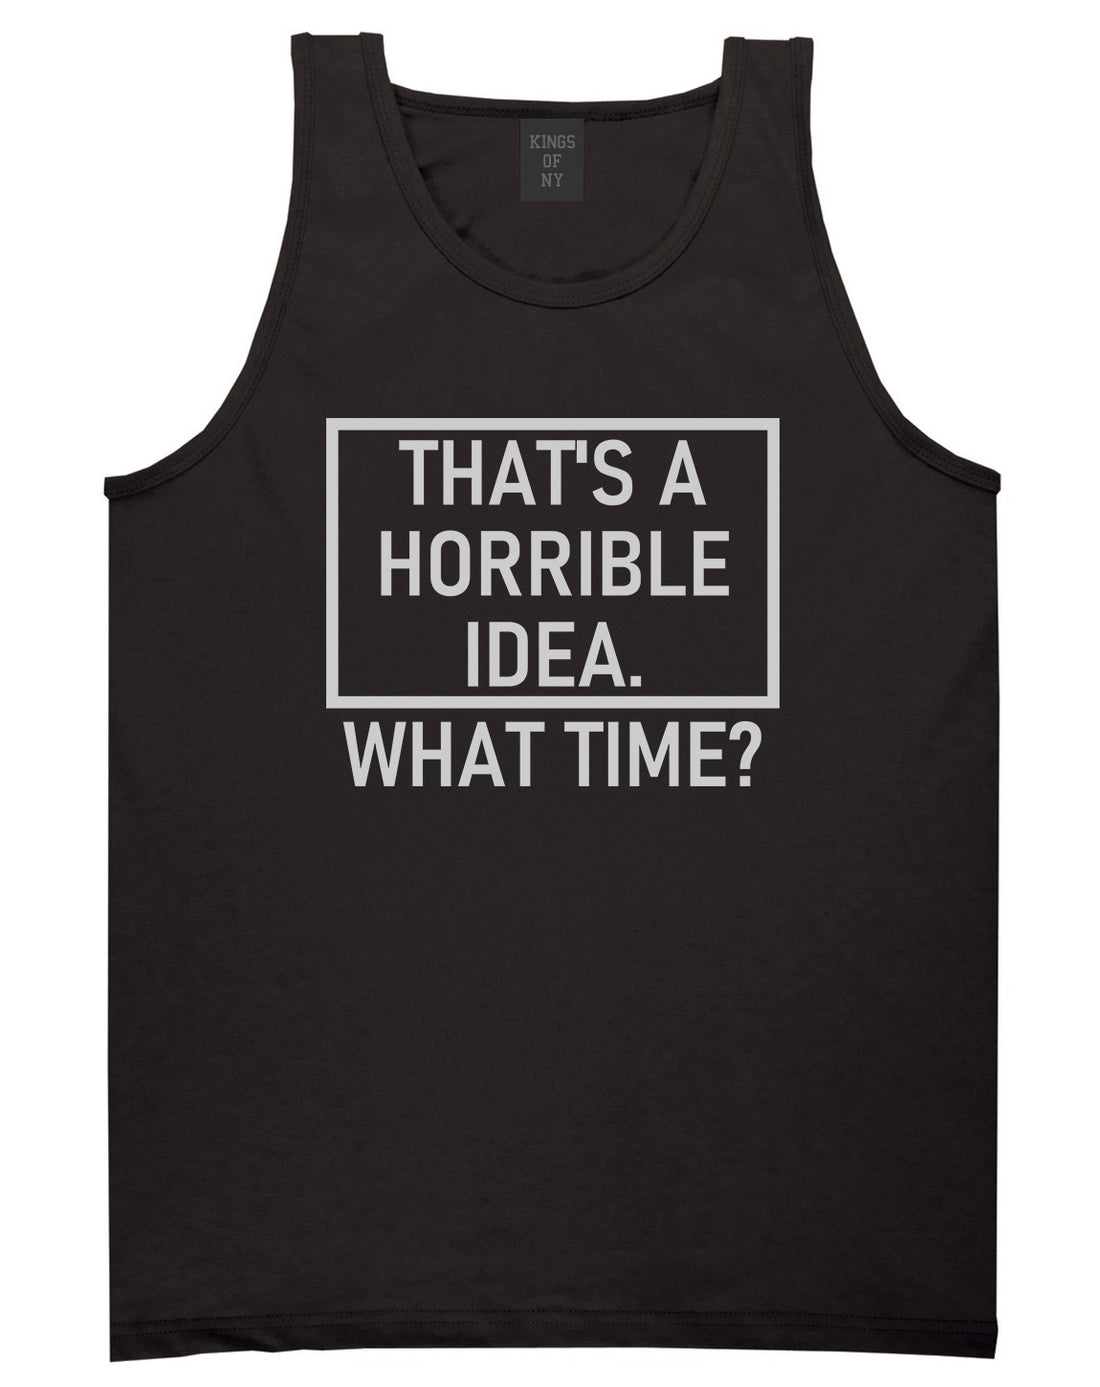 Thats A Horrible Idea What Time Funny Mens Tank Top T-Shirt Black